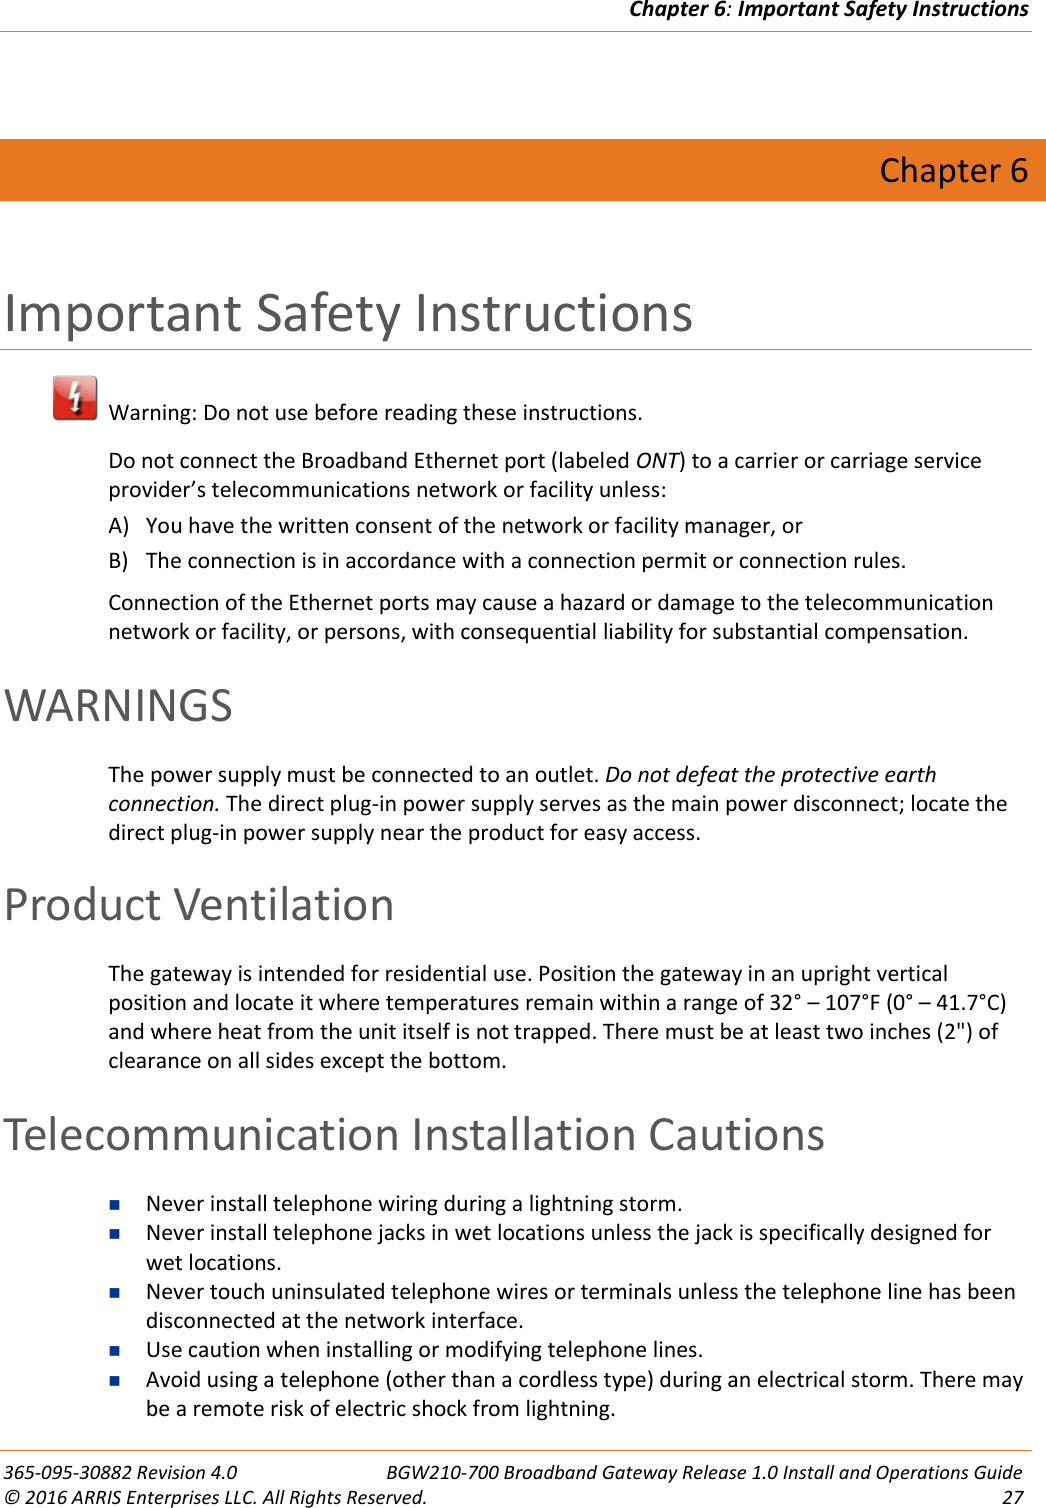 Chapter 6: Important Safety Instructions  365-095-30882 Revision 4.0  BGW210-700 Broadband Gateway Release 1.0 Install and Operations Guide © 2016 ARRIS Enterprises LLC. All Rights Reserved.  27   Chapter 6 Important Safety Instructions   Warning: Do not use before reading these instructions. Do not connect the Broadband Ethernet port (labeled ONT) to a carrier or carriage service provider’s telecommunications network or facility unless:  A) You have the written consent of the network or facility manager, or  B) The connection is in accordance with a connection permit or connection rules. Connection of the Ethernet ports may cause a hazard or damage to the telecommunication network or facility, or persons, with consequential liability for substantial compensation.   WARNINGS The power supply must be connected to an outlet. Do not defeat the protective earth connection. The direct plug-in power supply serves as the main power disconnect; locate the direct plug-in power supply near the product for easy access. Product Ventilation The gateway is intended for residential use. Position the gateway in an upright vertical position and locate it where temperatures remain within a range of 32° – 107°F (0° – 41.7°C) and where heat from the unit itself is not trapped. There must be at least two inches (2&quot;) of clearance on all sides except the bottom.   Telecommunication Installation Cautions  Never install telephone wiring during a lightning storm.  Never install telephone jacks in wet locations unless the jack is specifically designed for wet locations.  Never touch uninsulated telephone wires or terminals unless the telephone line has been disconnected at the network interface.  Use caution when installing or modifying telephone lines.  Avoid using a telephone (other than a cordless type) during an electrical storm. There may be a remote risk of electric shock from lightning. 